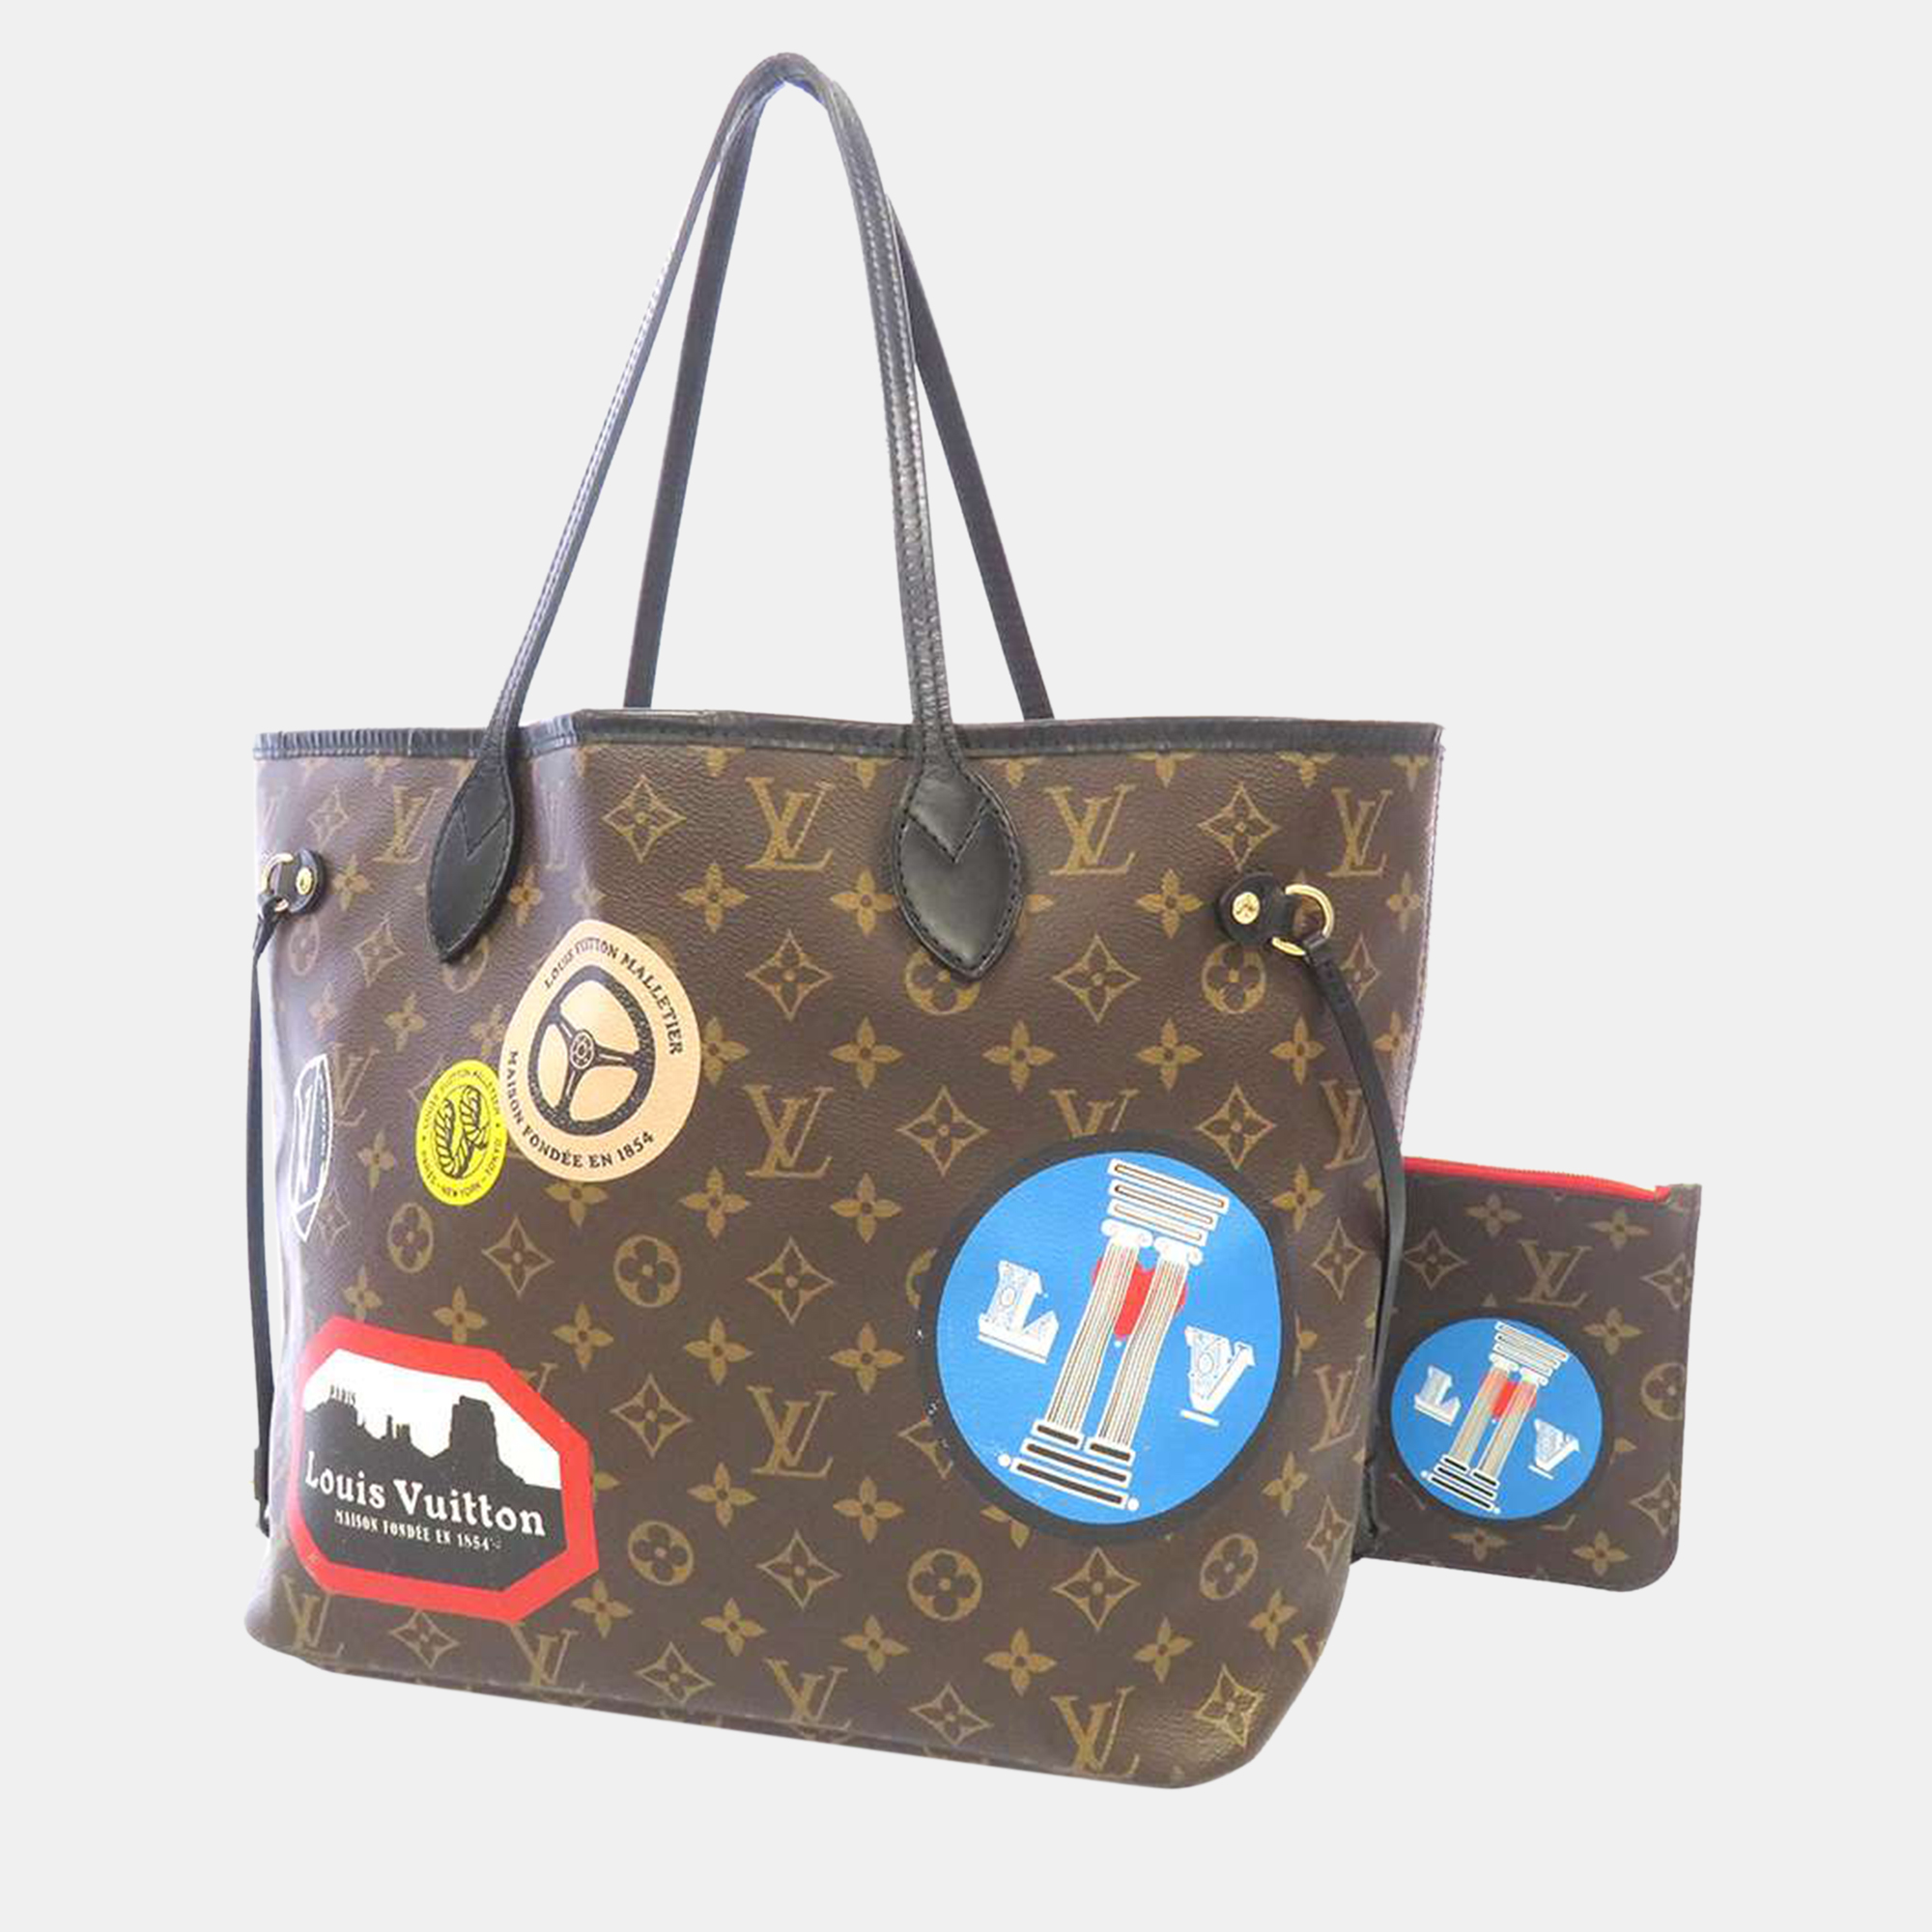 LOUIS VUITTON Damier Ebene Travel Stickers Neo Neverfull MM Tote